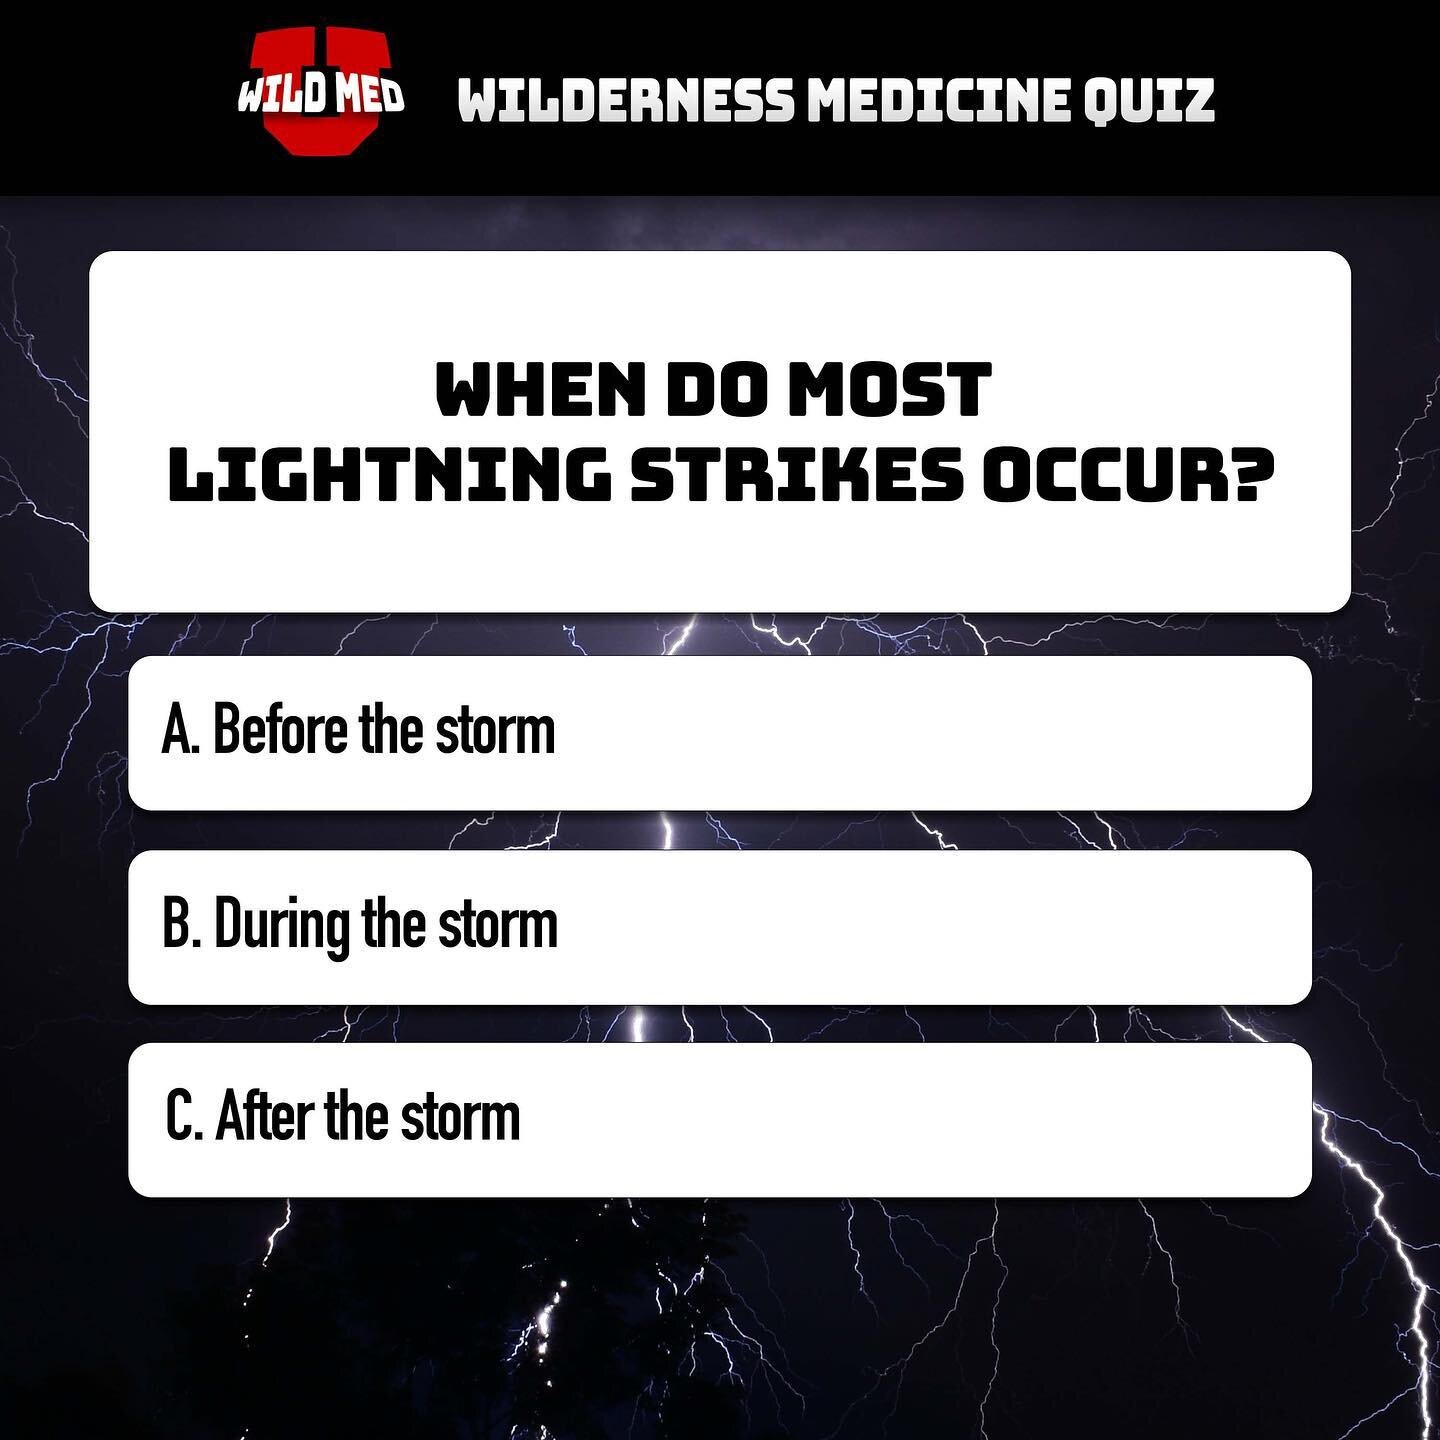 The answer is a. The vast majority of lighting strikes occur ahead of a storm from positive charges that rise to the top of a cloud. This allows a charge to strike long before a storm, a great distance away, even beneath blue skies. When thunder roar